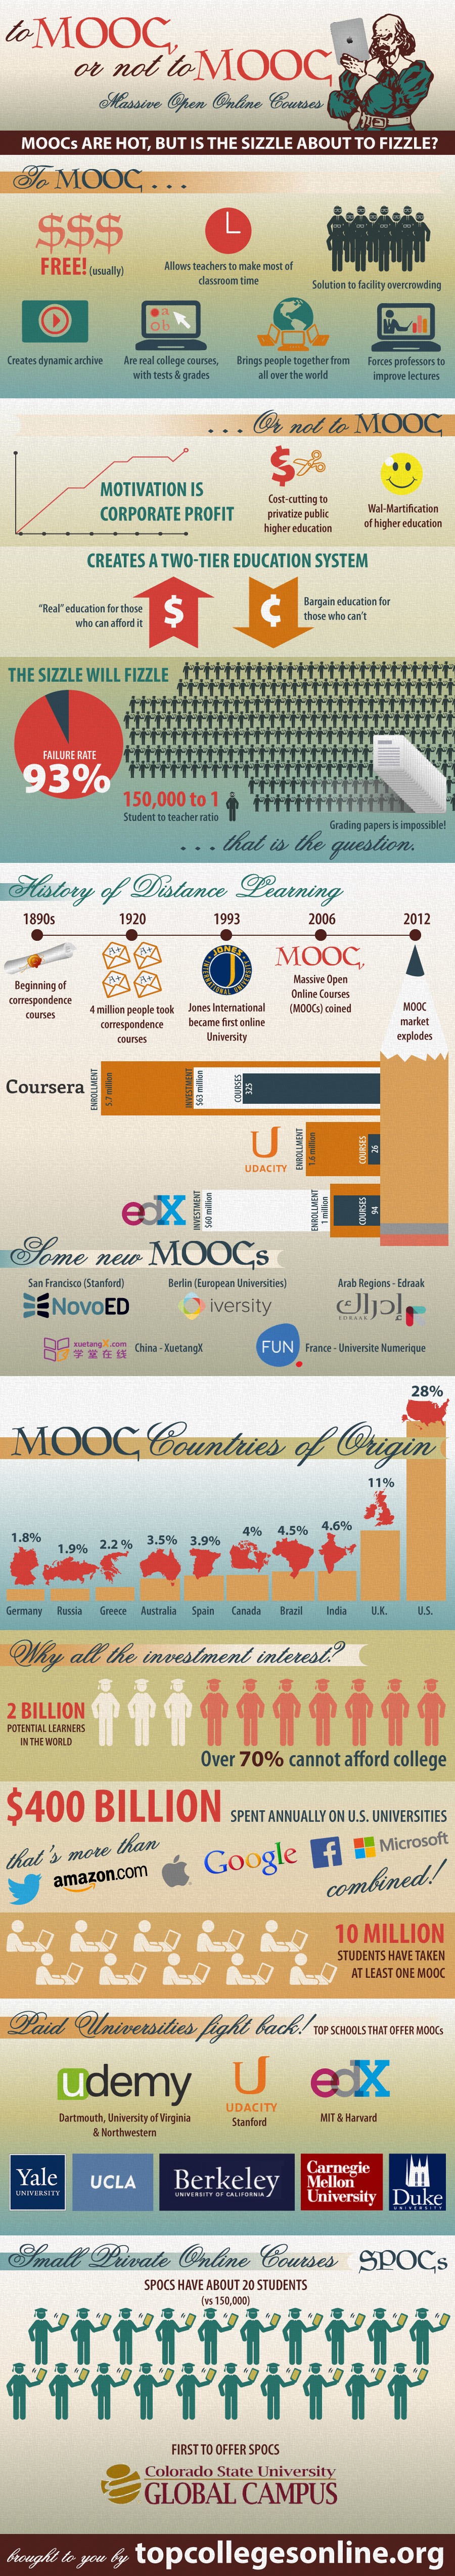 To-MOOC-or-Not-to-MOOC-Infographic